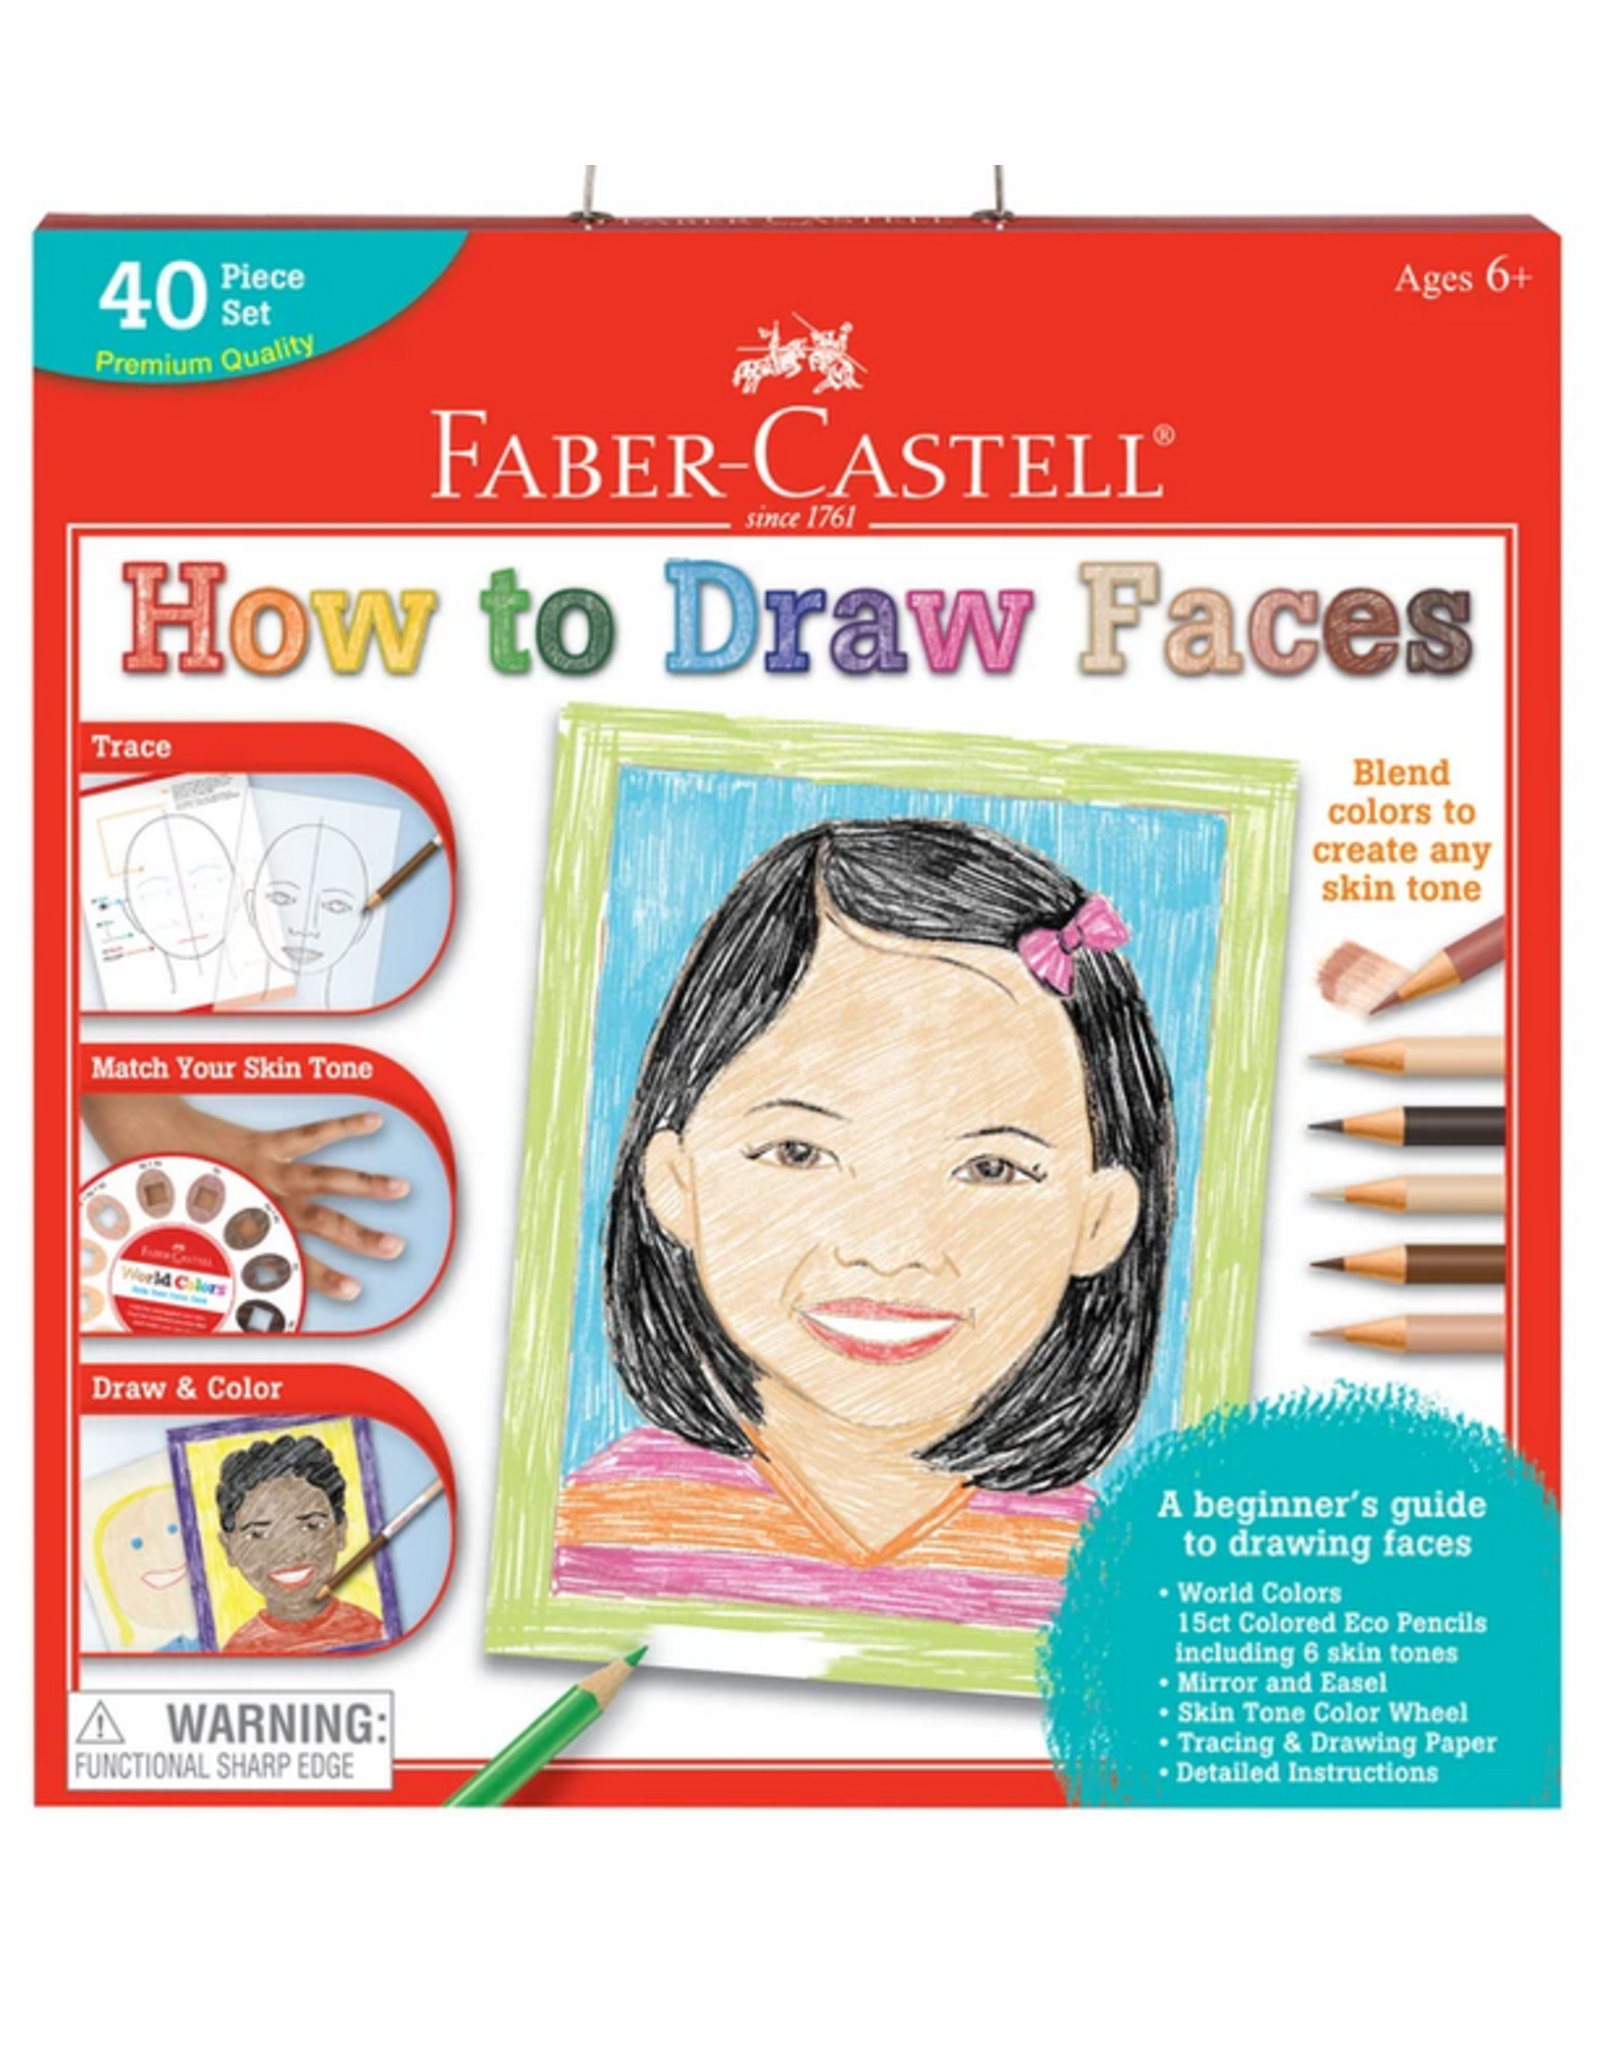 Faber-Castell World Colors - How to Draw Faces